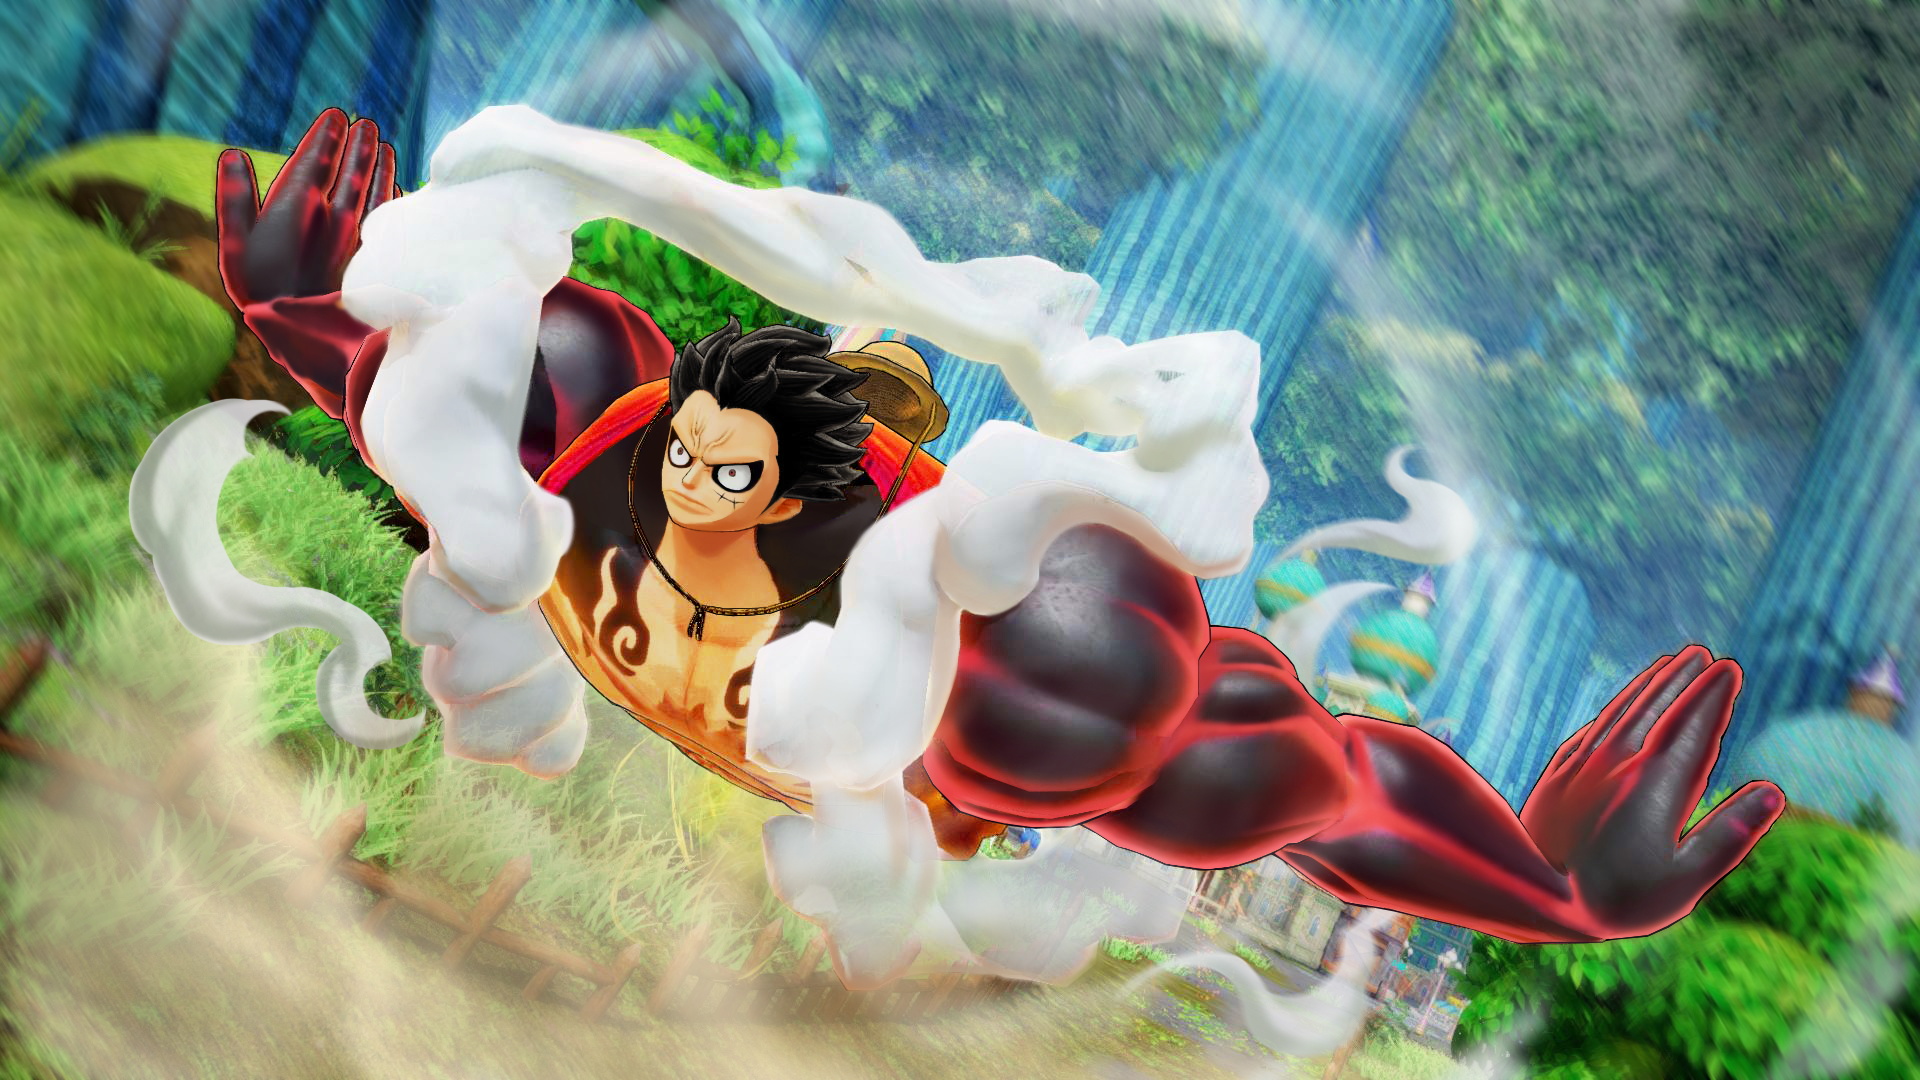 One Piece Pirate Warriors 4 Screenshot Showing a Powered-Up Luffy Flying Low to the Ground